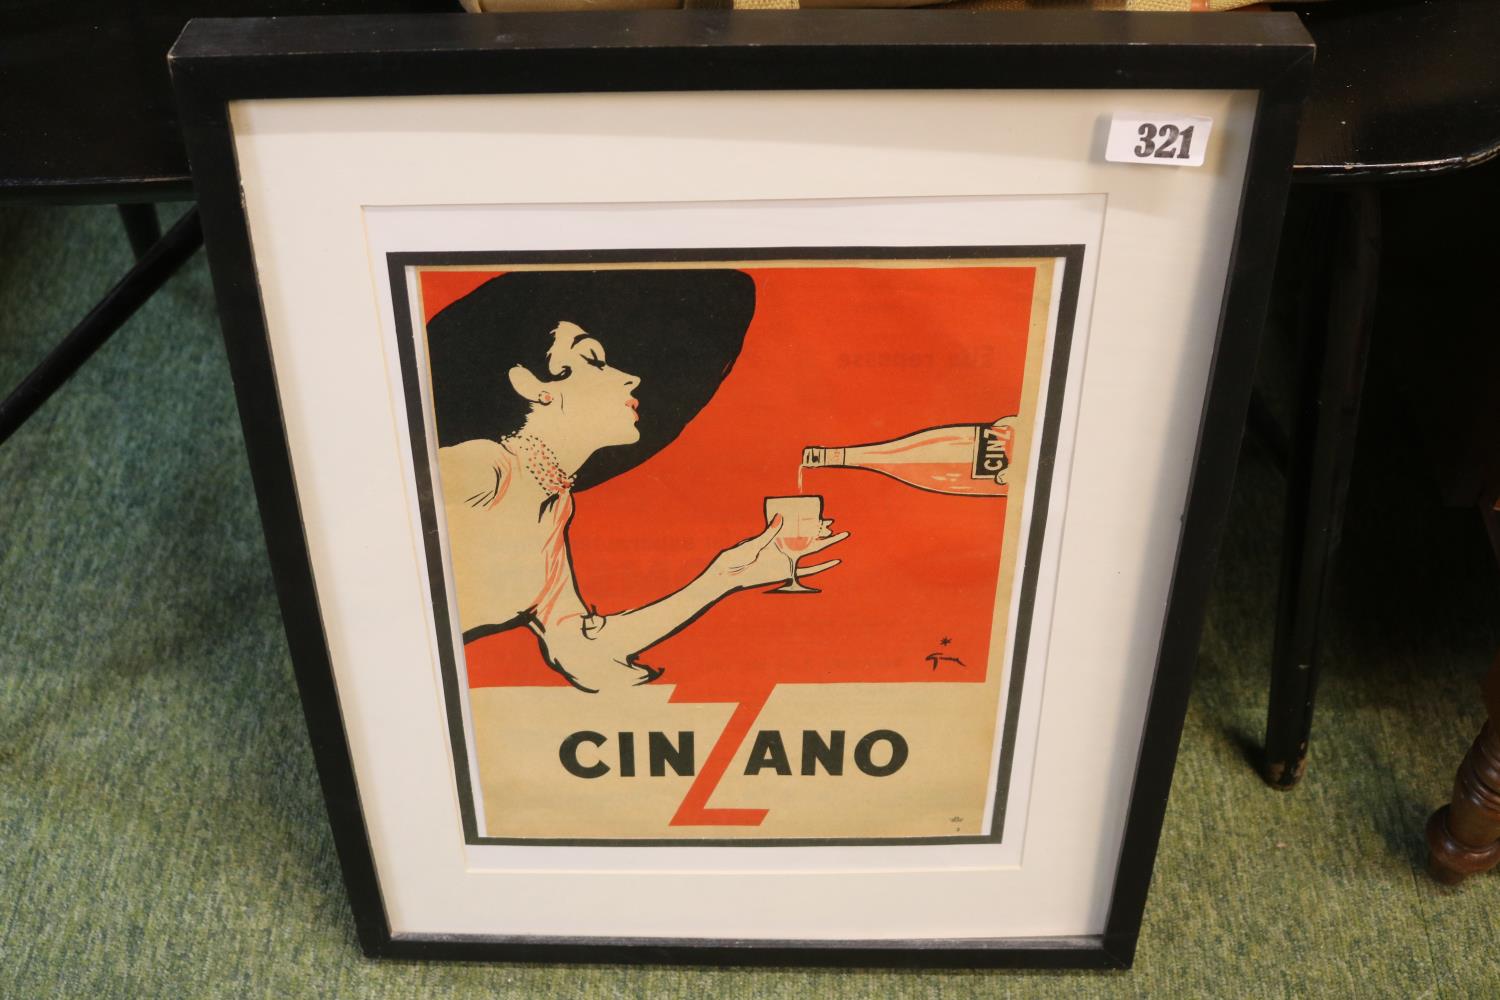 Vintage Cinzano advertising print framed and mounted